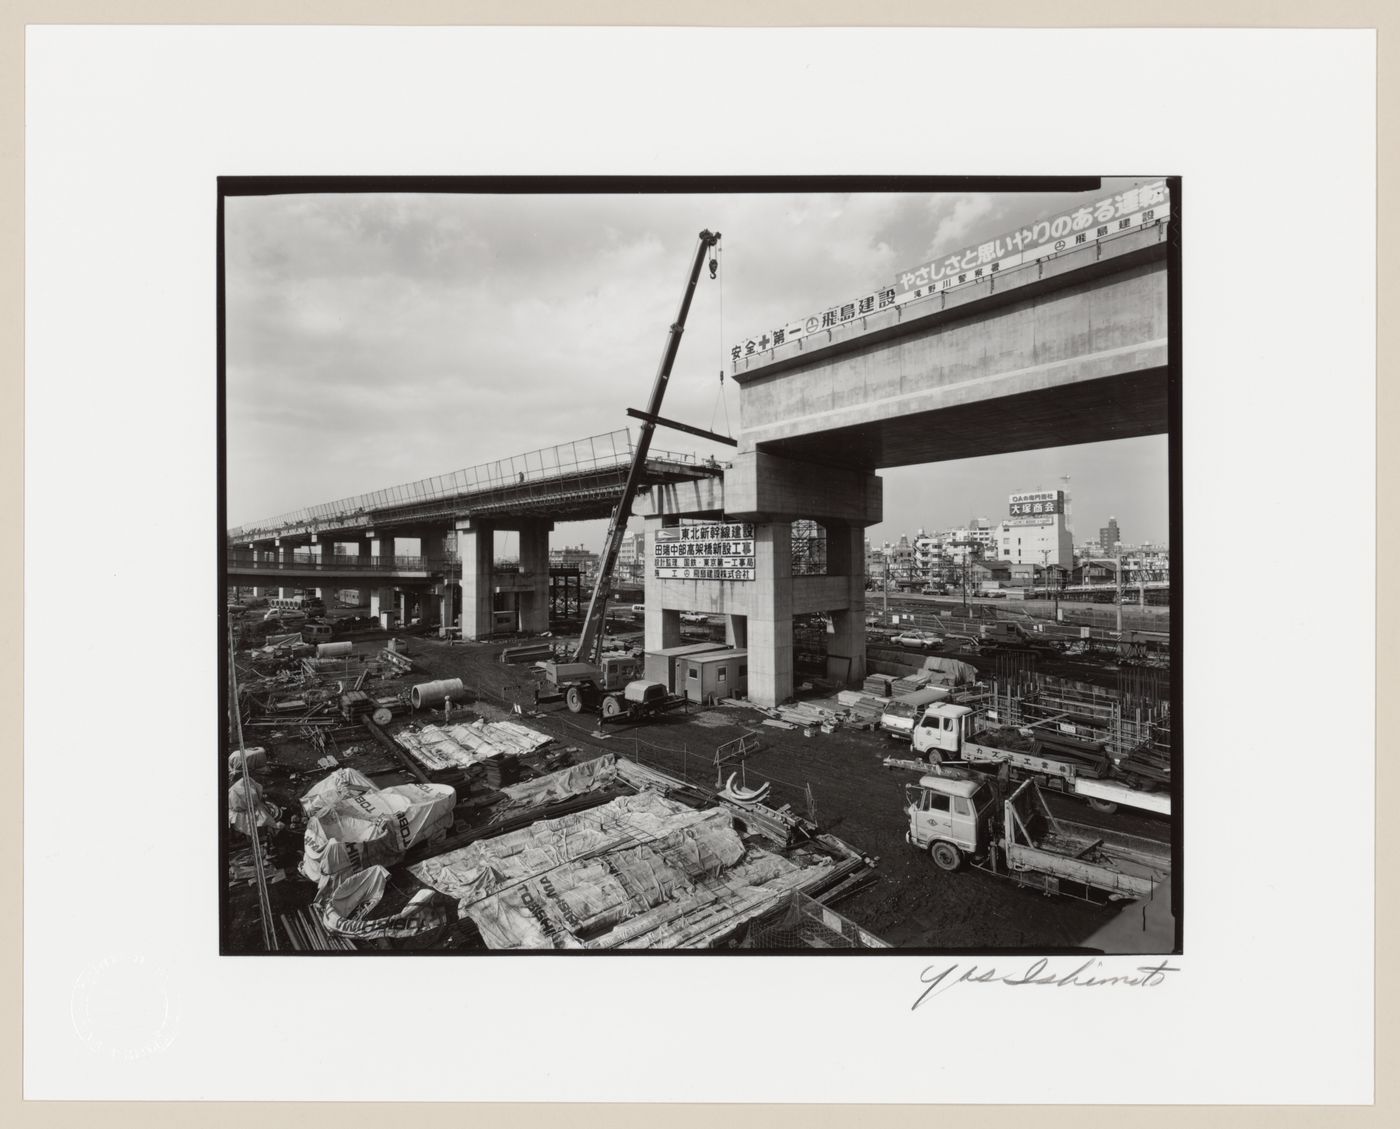 View of an overpass under construction showing construction equipment in the foreground and buildings in the background, Tokyo, Japan